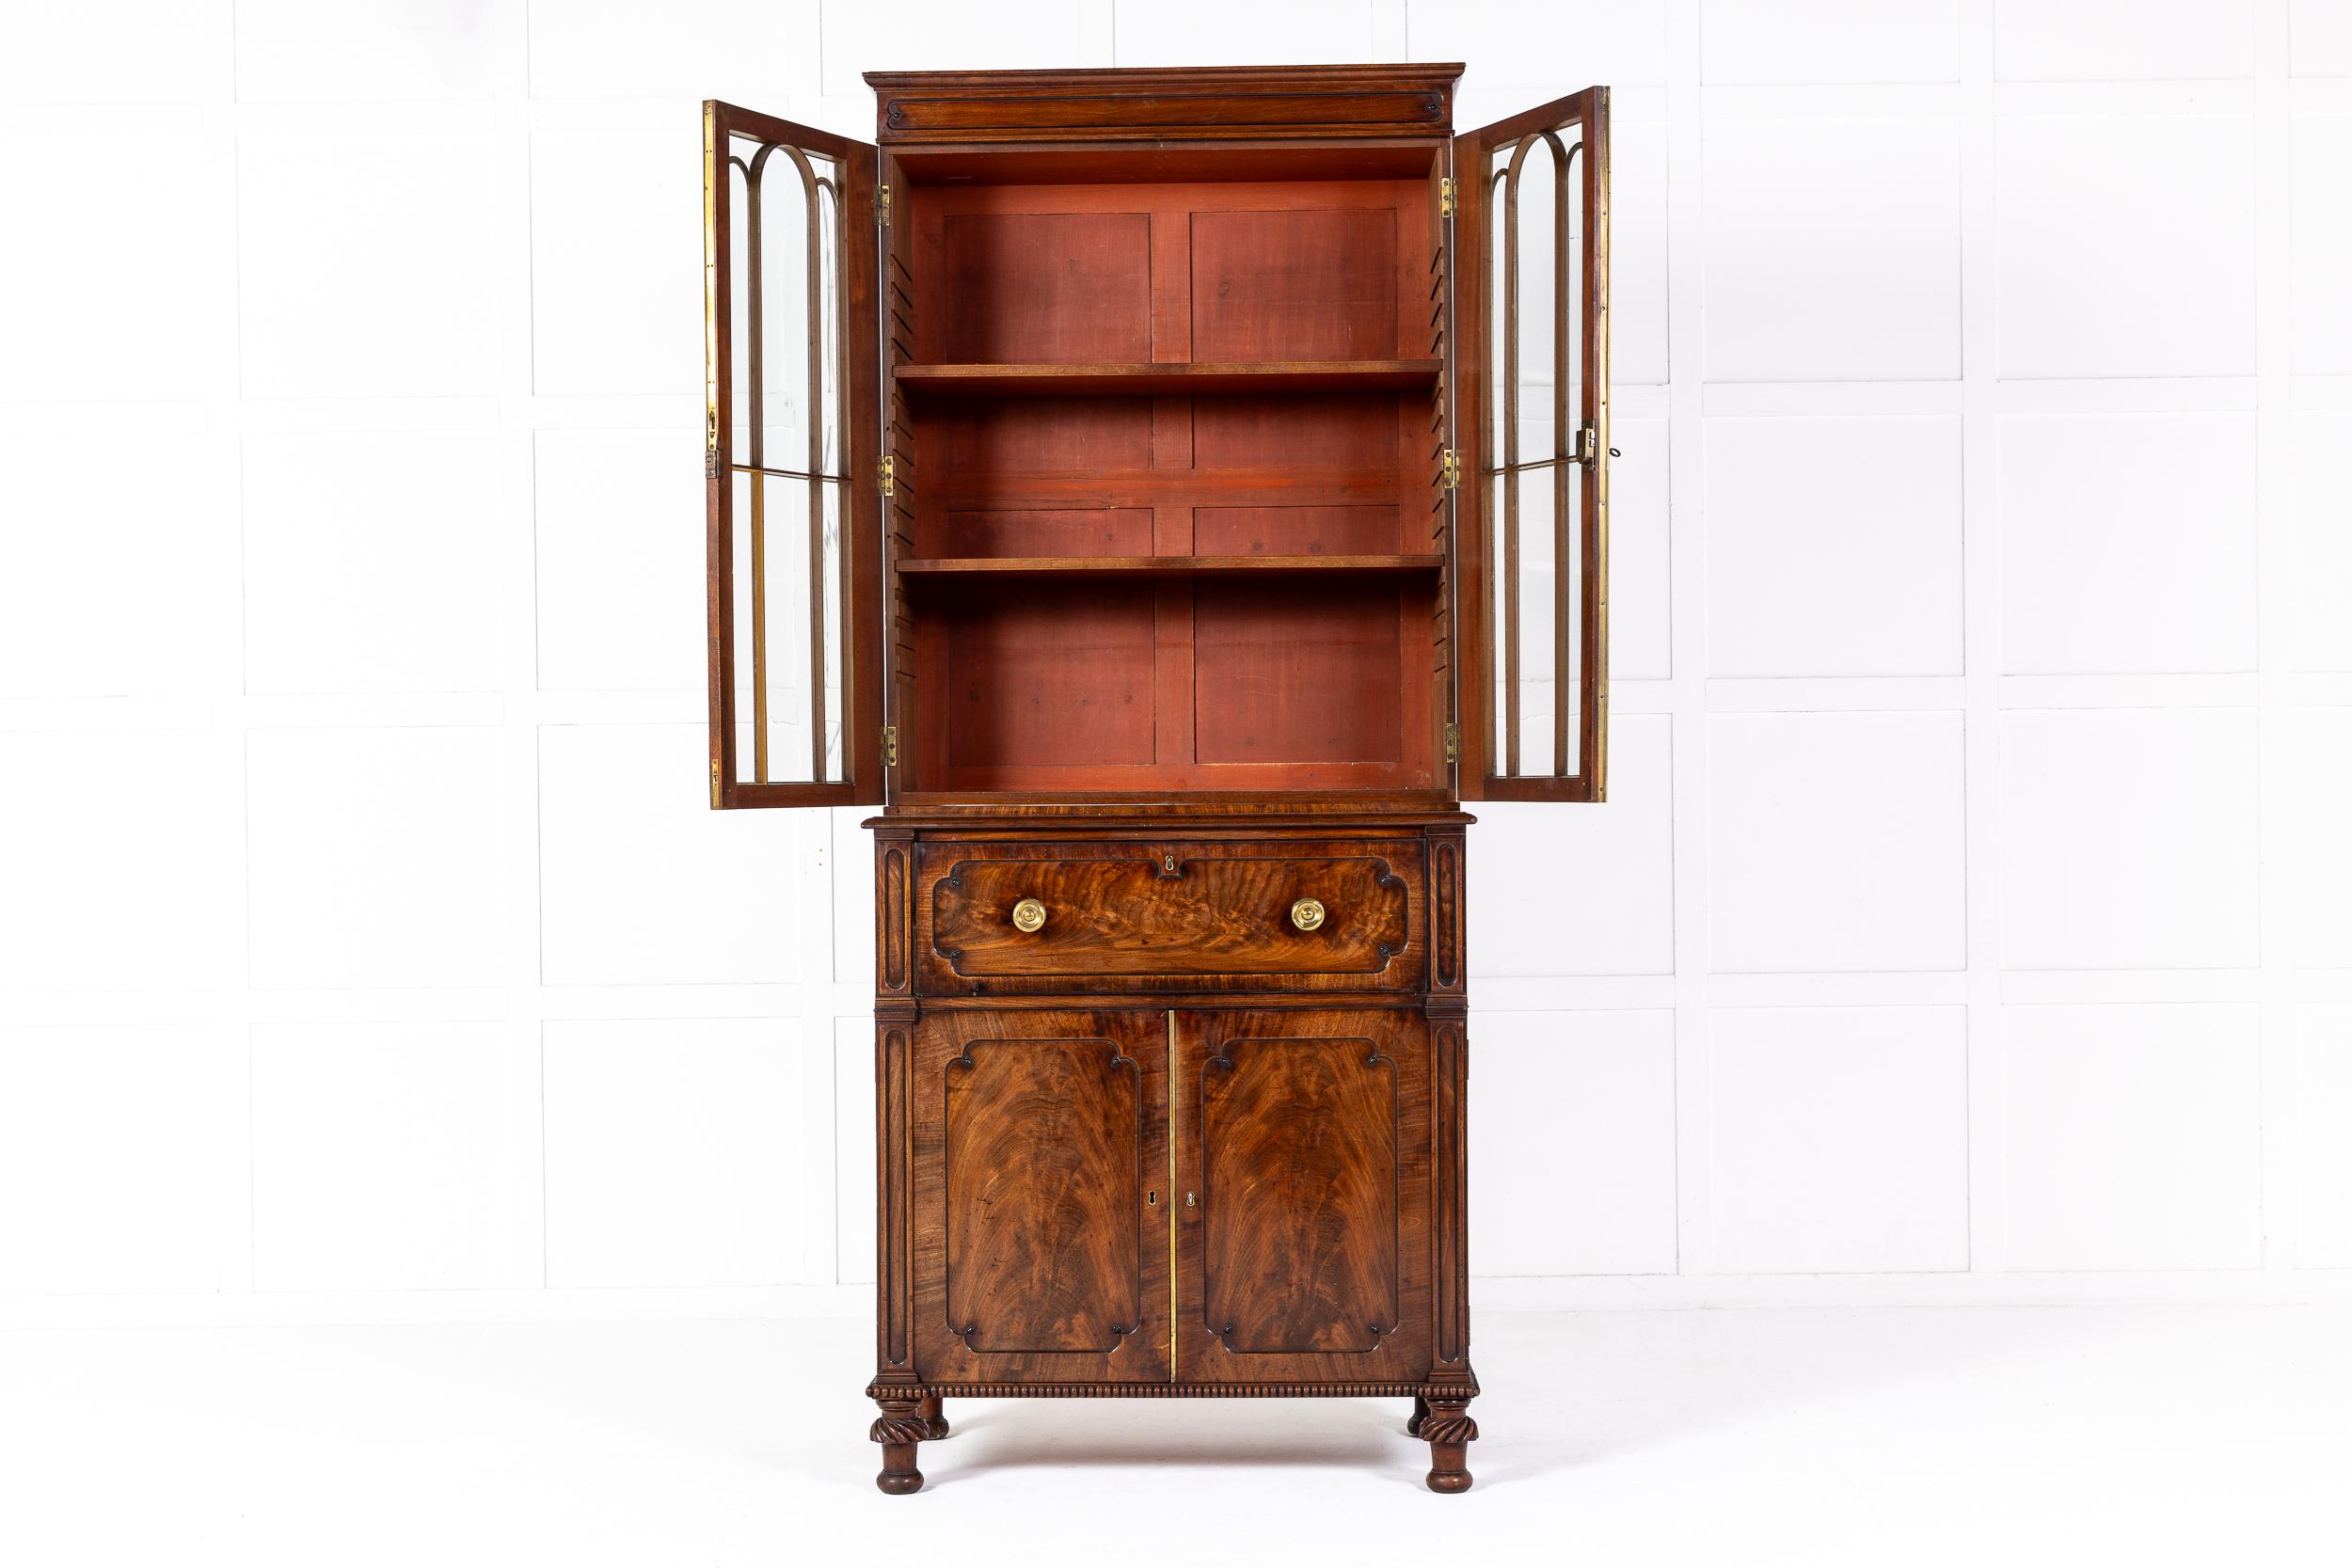 A Very Fine Late Regency Period Mahogany Secretaire Bookcase in the Manner of J. C. Loudon c.1825-30.

Of fine and small size, this charming piece is in a restrained gothic style with arched astragal glazing bars to the upper bookcase doors and